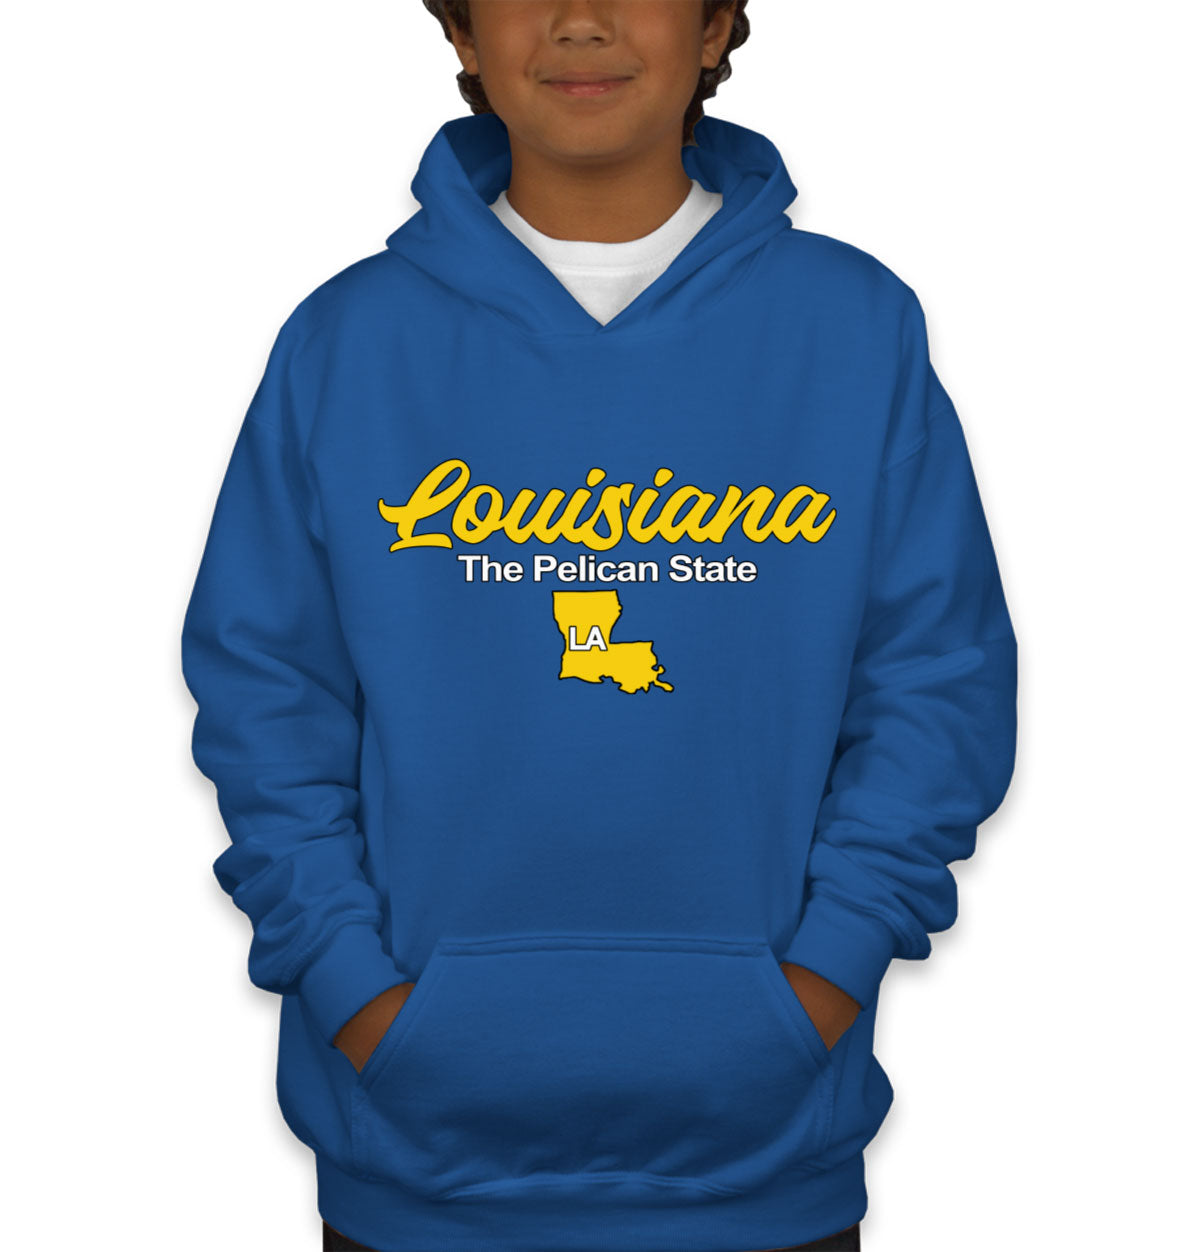 Louisiana The Pelican State Youth Hoodie